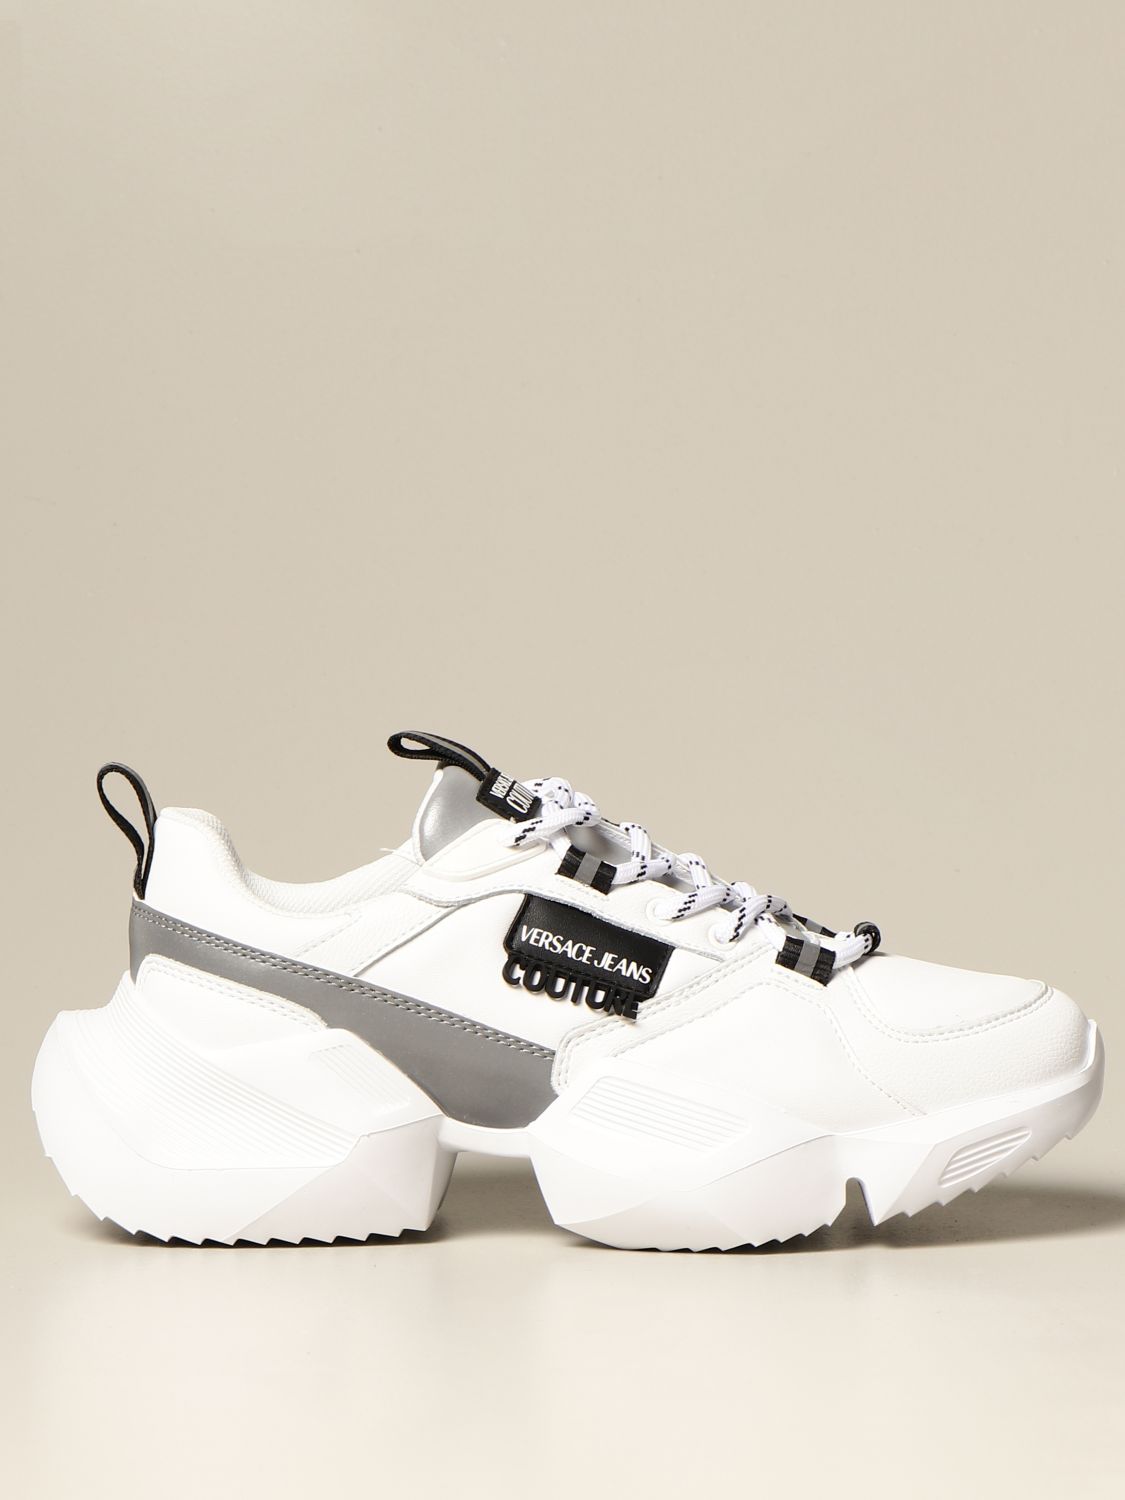 VERSACE JEANS COUTURE: Uranus leather sneakers with - White | Versace Jeans Couture sneakers E0YZASU171603 online at GIGLIO.COM